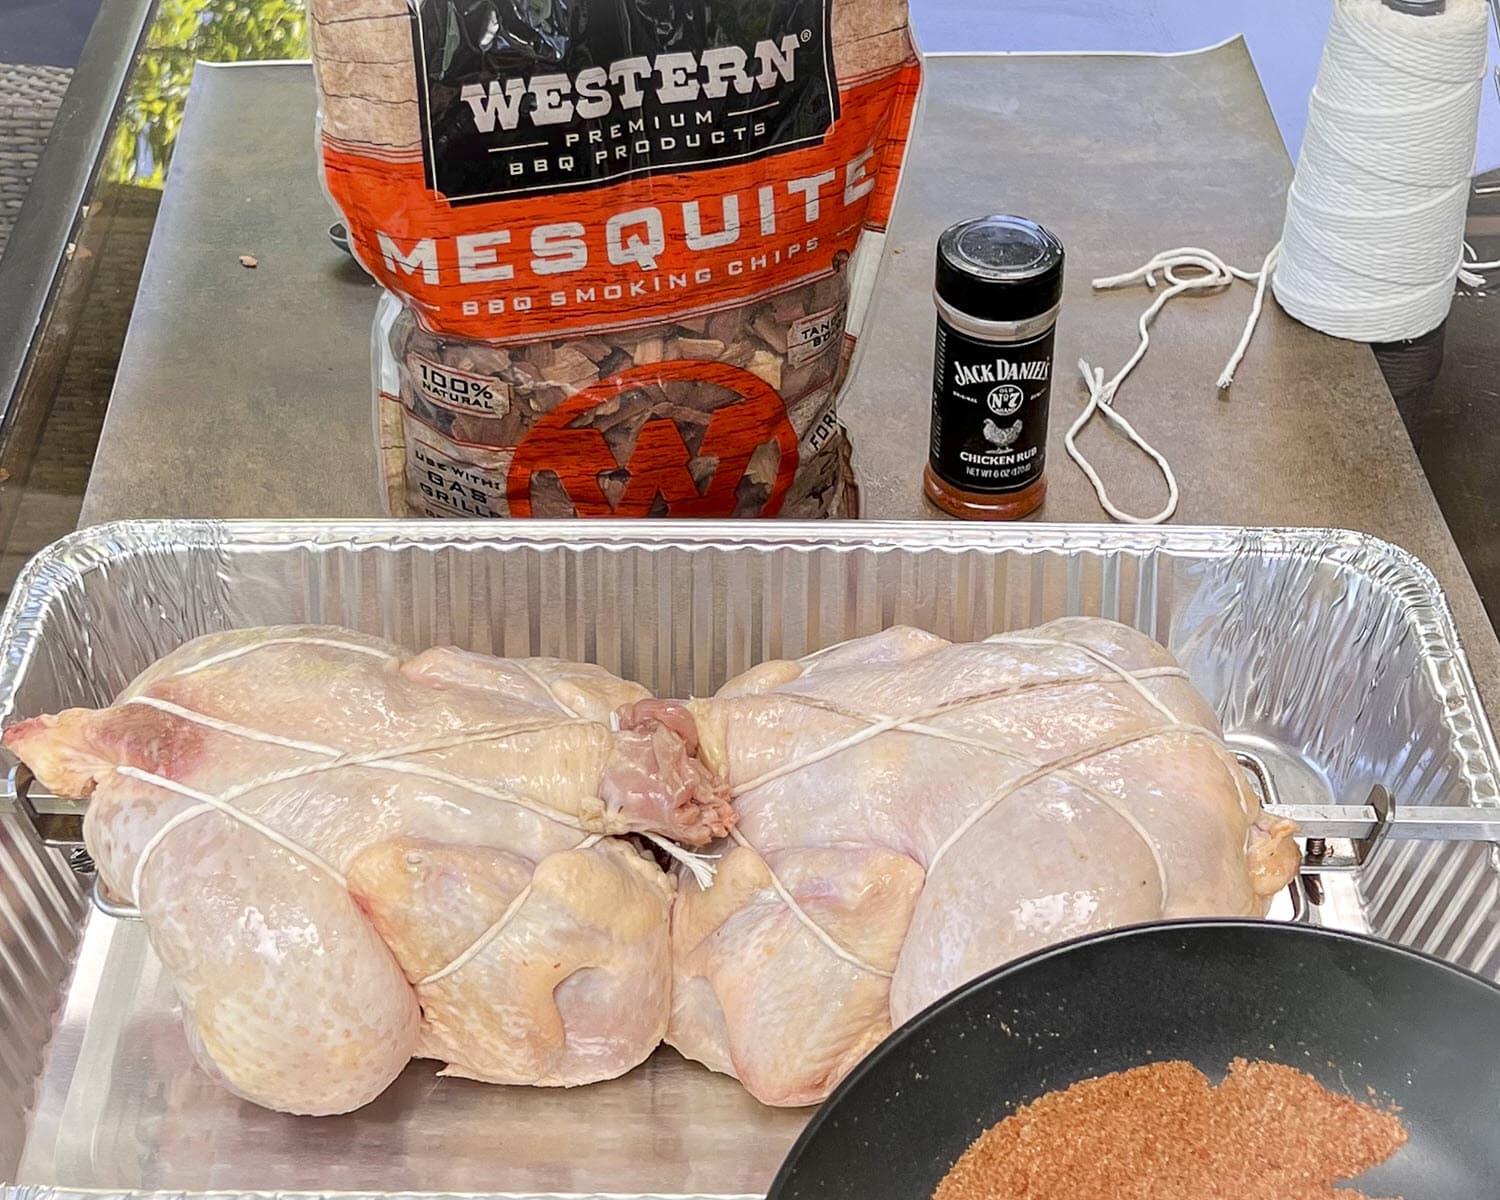 Western Mesquite Smoking Chips bag, Jack Daniel's Chicken rub string and whole chickens